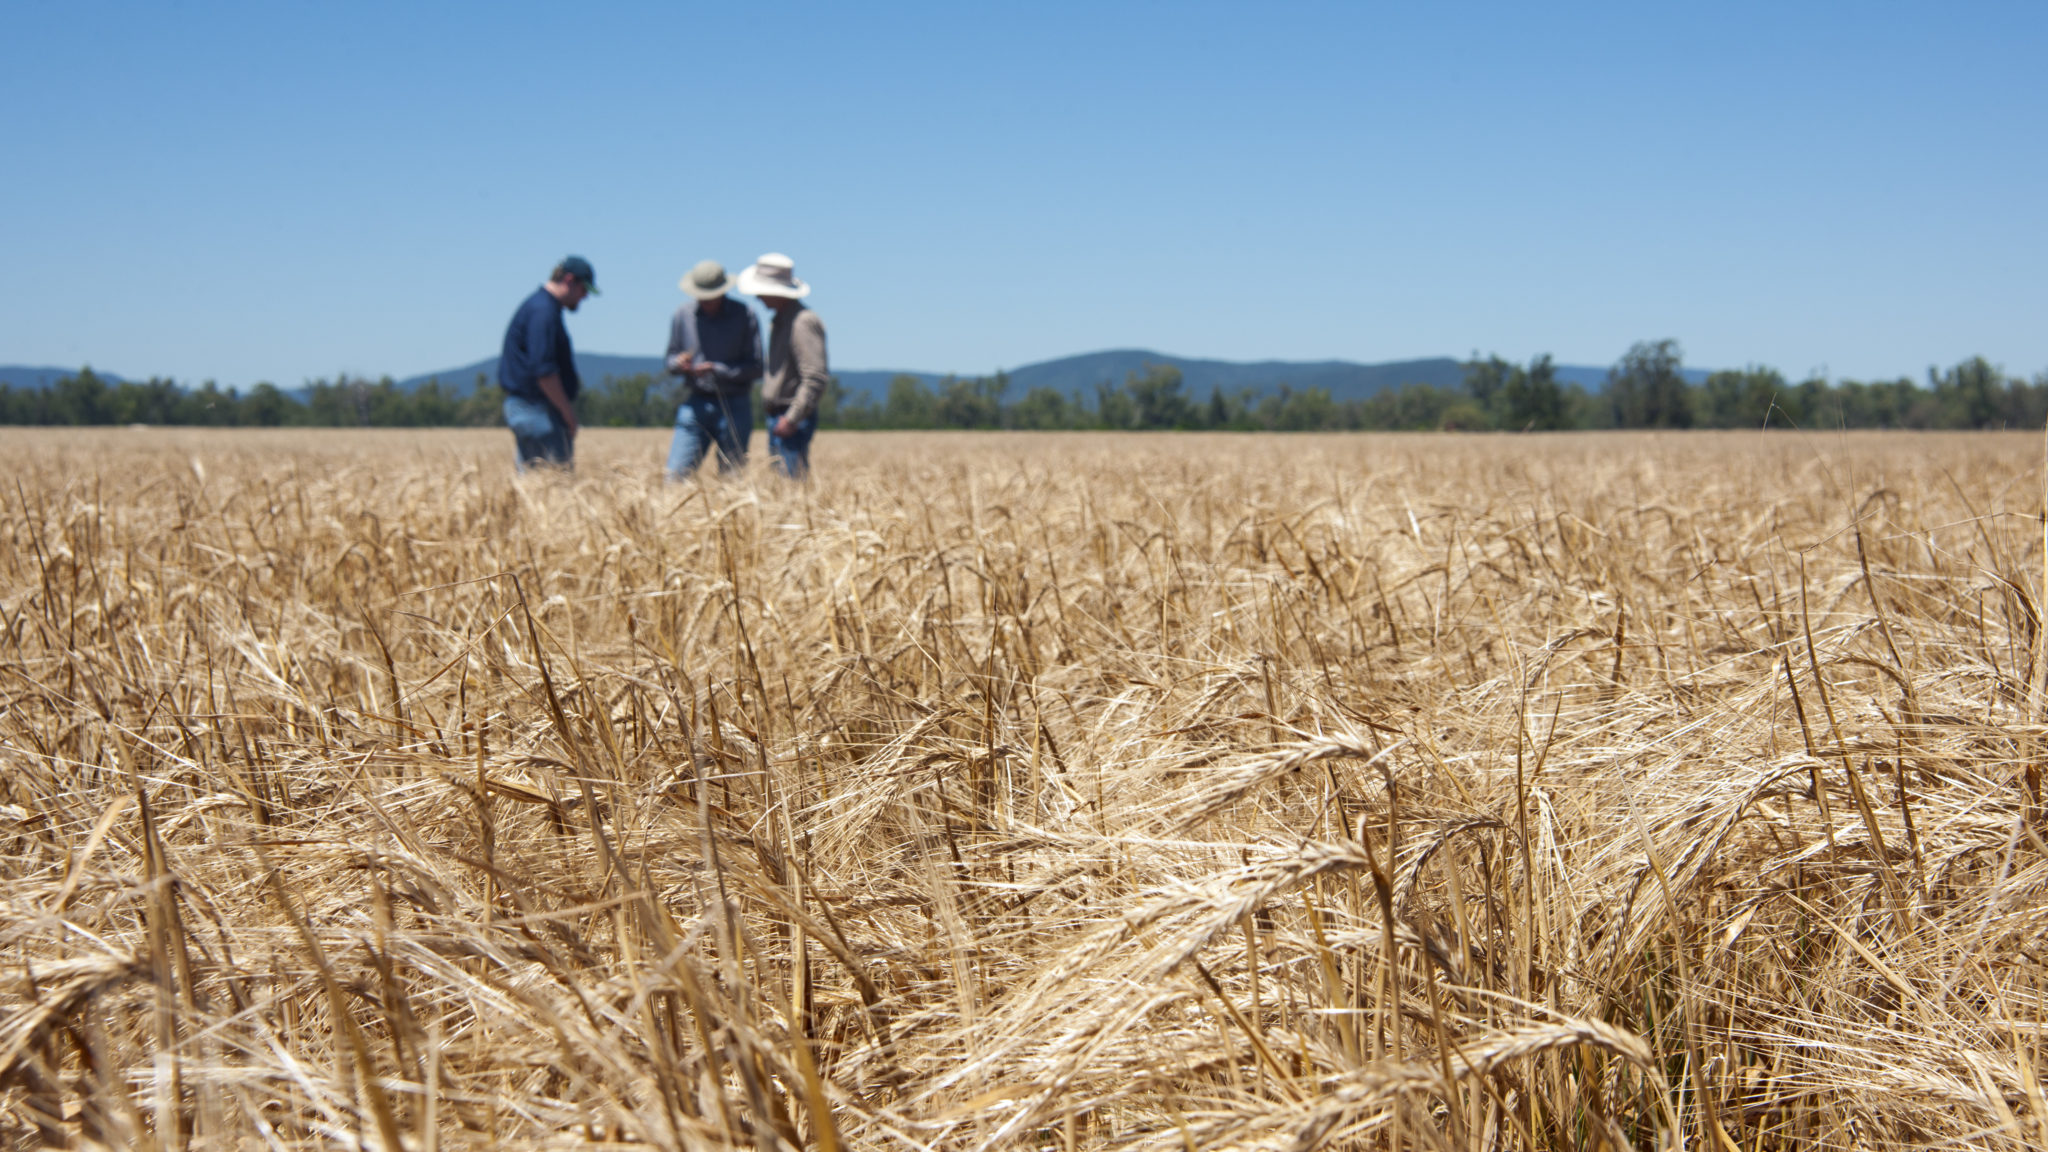 A wheat filed with a group of men standing in the background